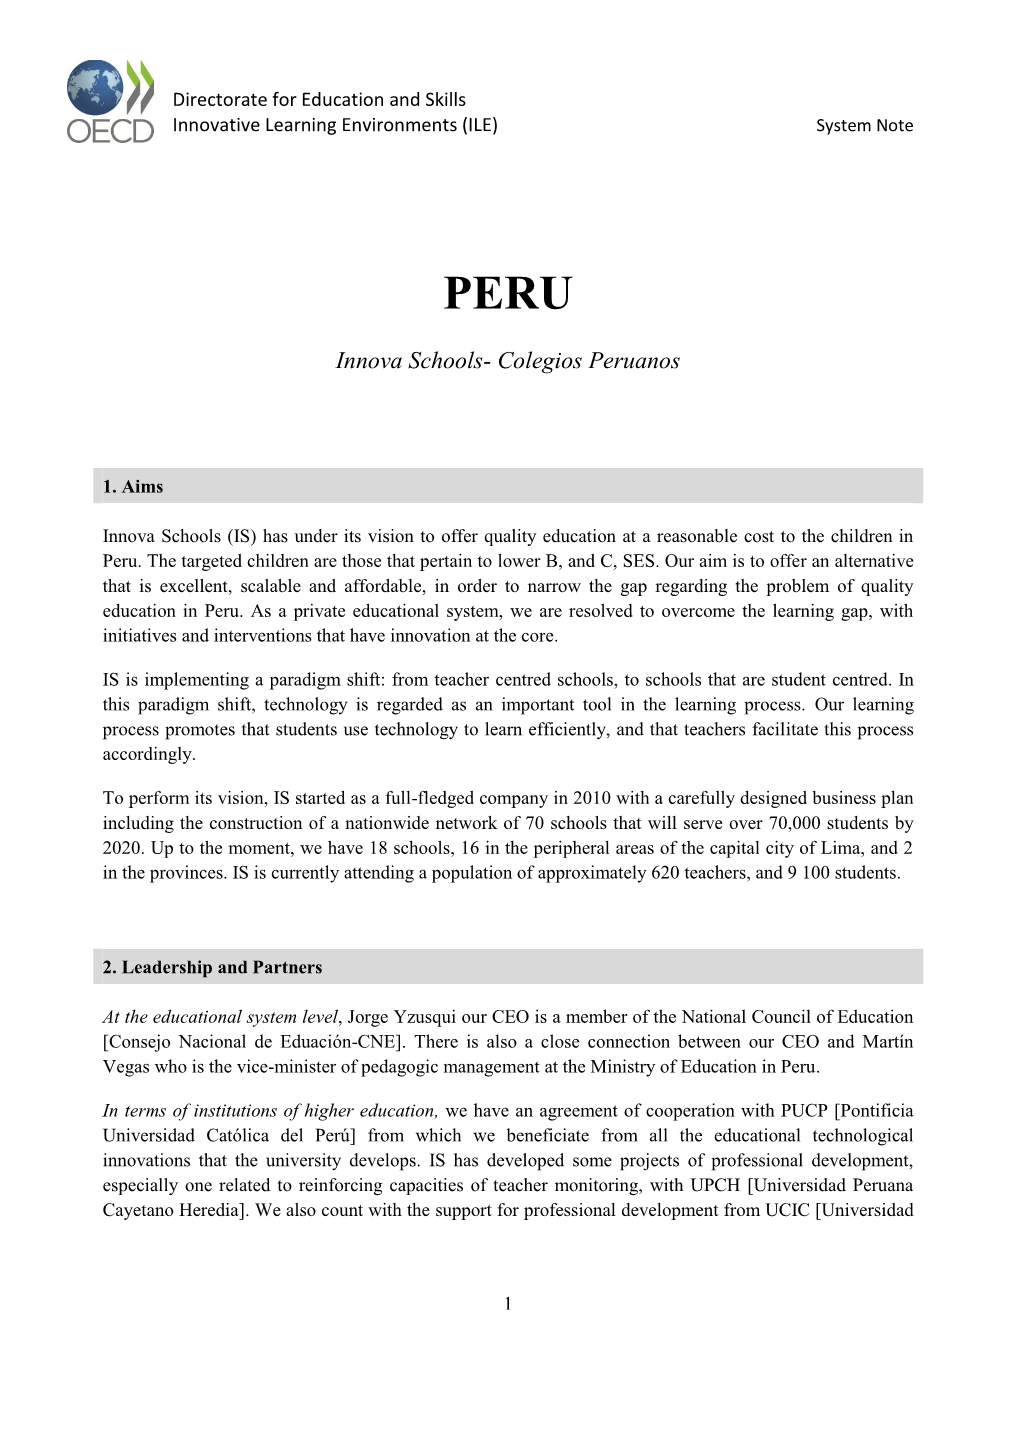 Innova Schools in Peru: the Economic and Social Context, Privatization, and the Educational Context in Peru